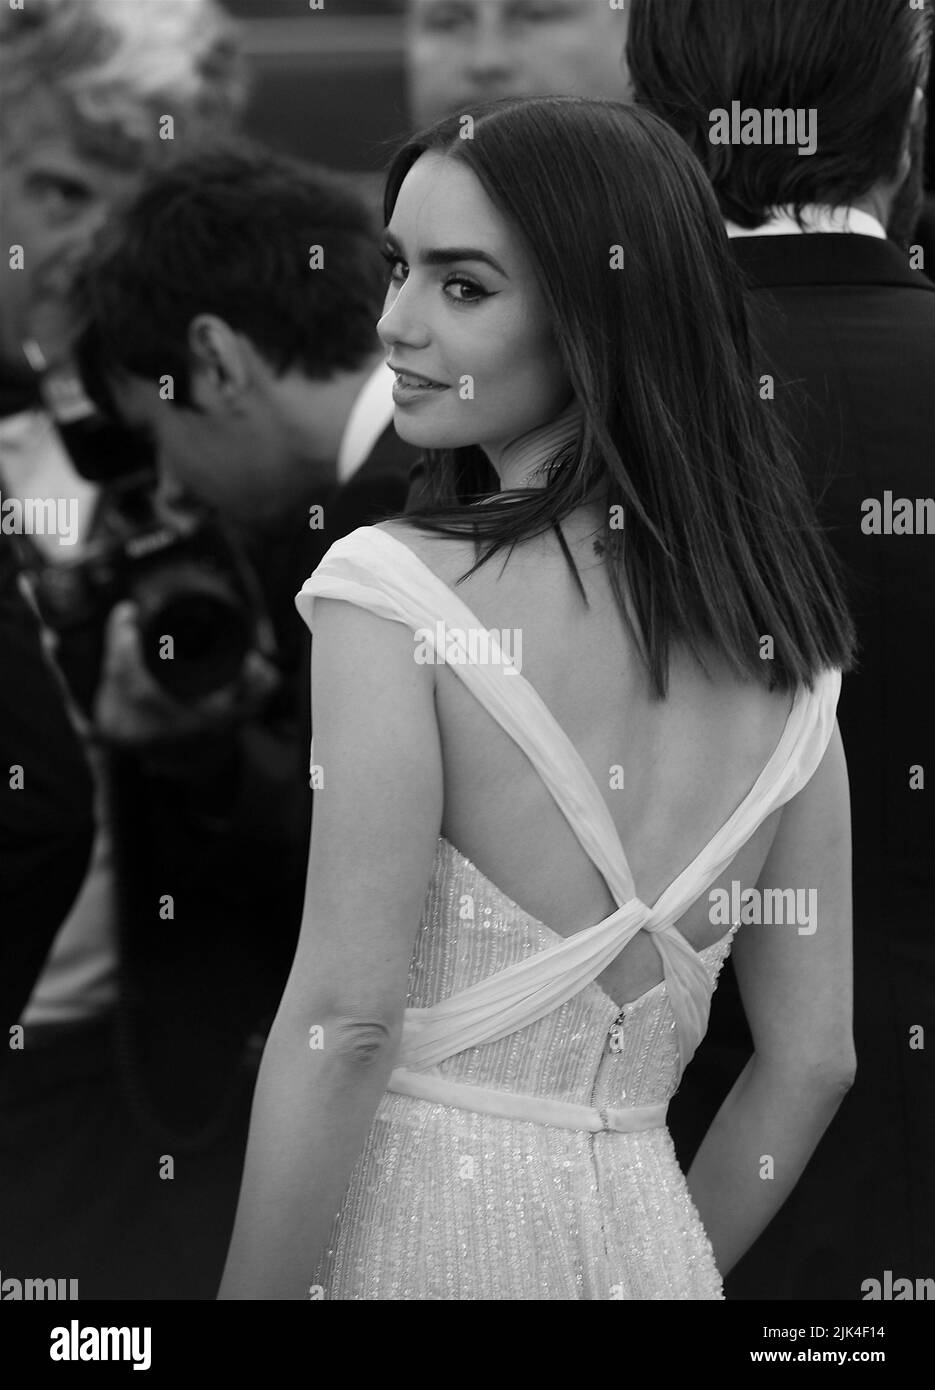 Lily Collins attends the Okja screening during the 70th annual Cannes Film Festival at Palais des Festivals on May 19, 2017 in Cannes, France. Stock Photo